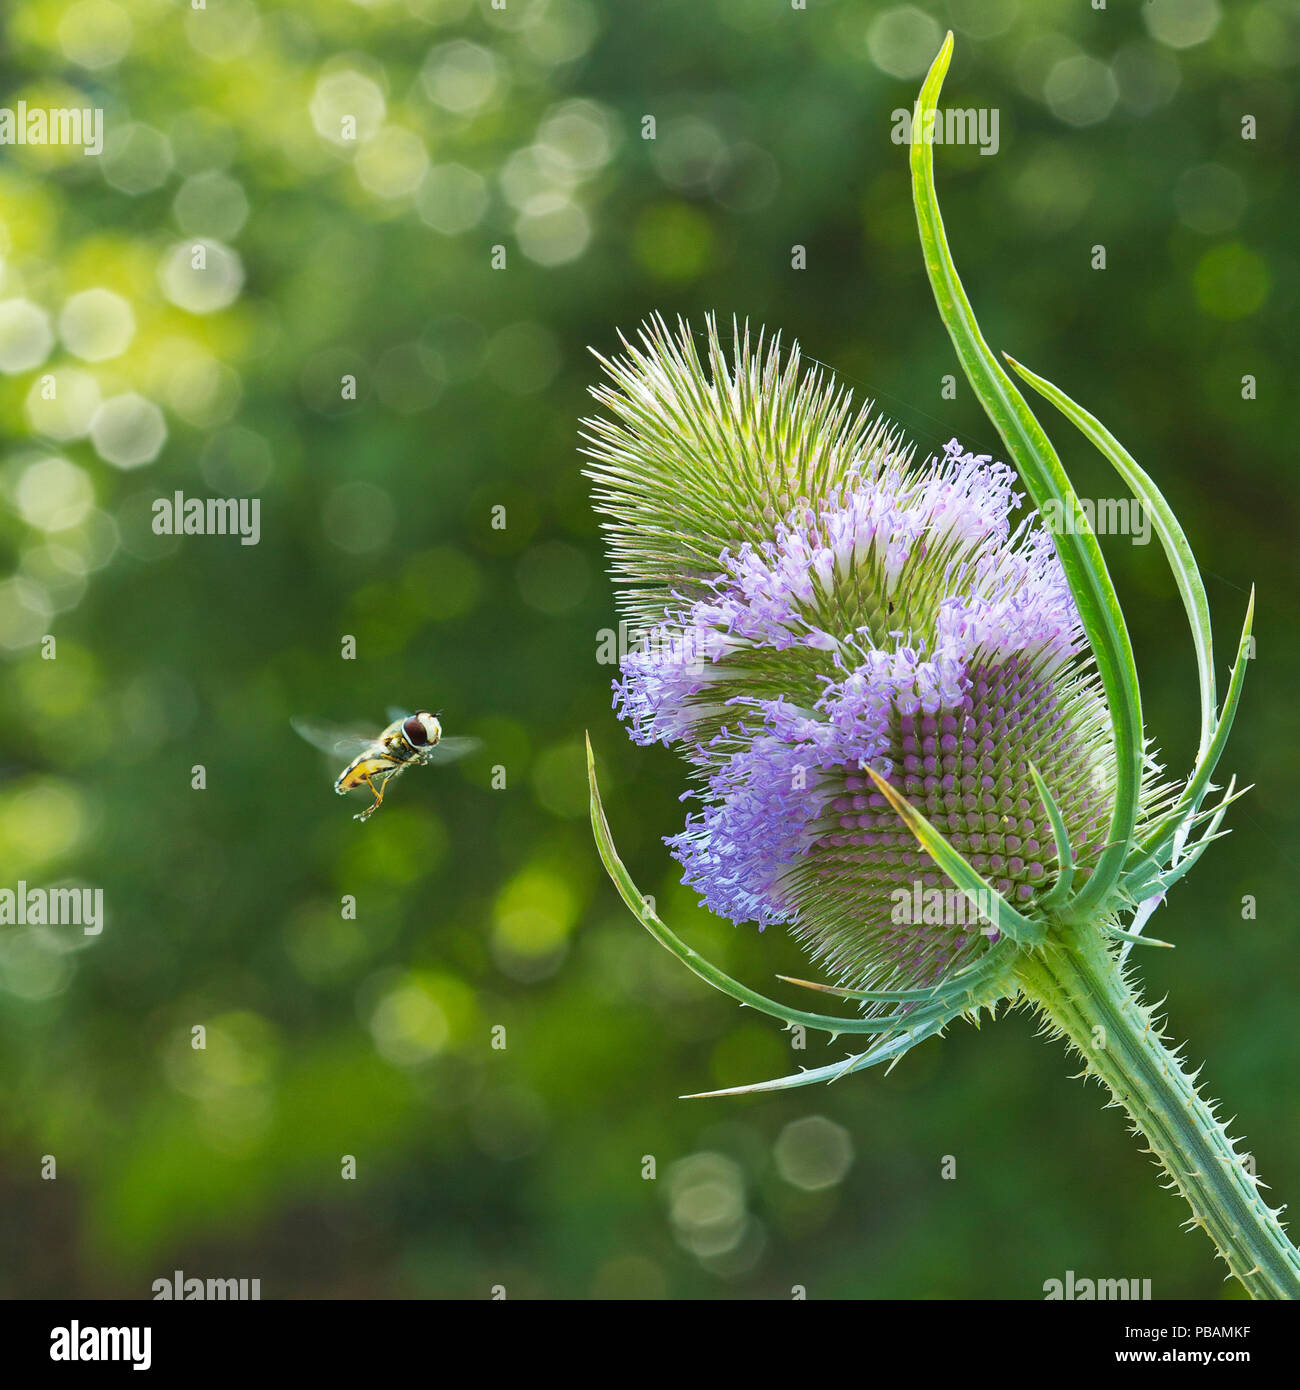 Hover fly approaching a teasel flower Stock Photo